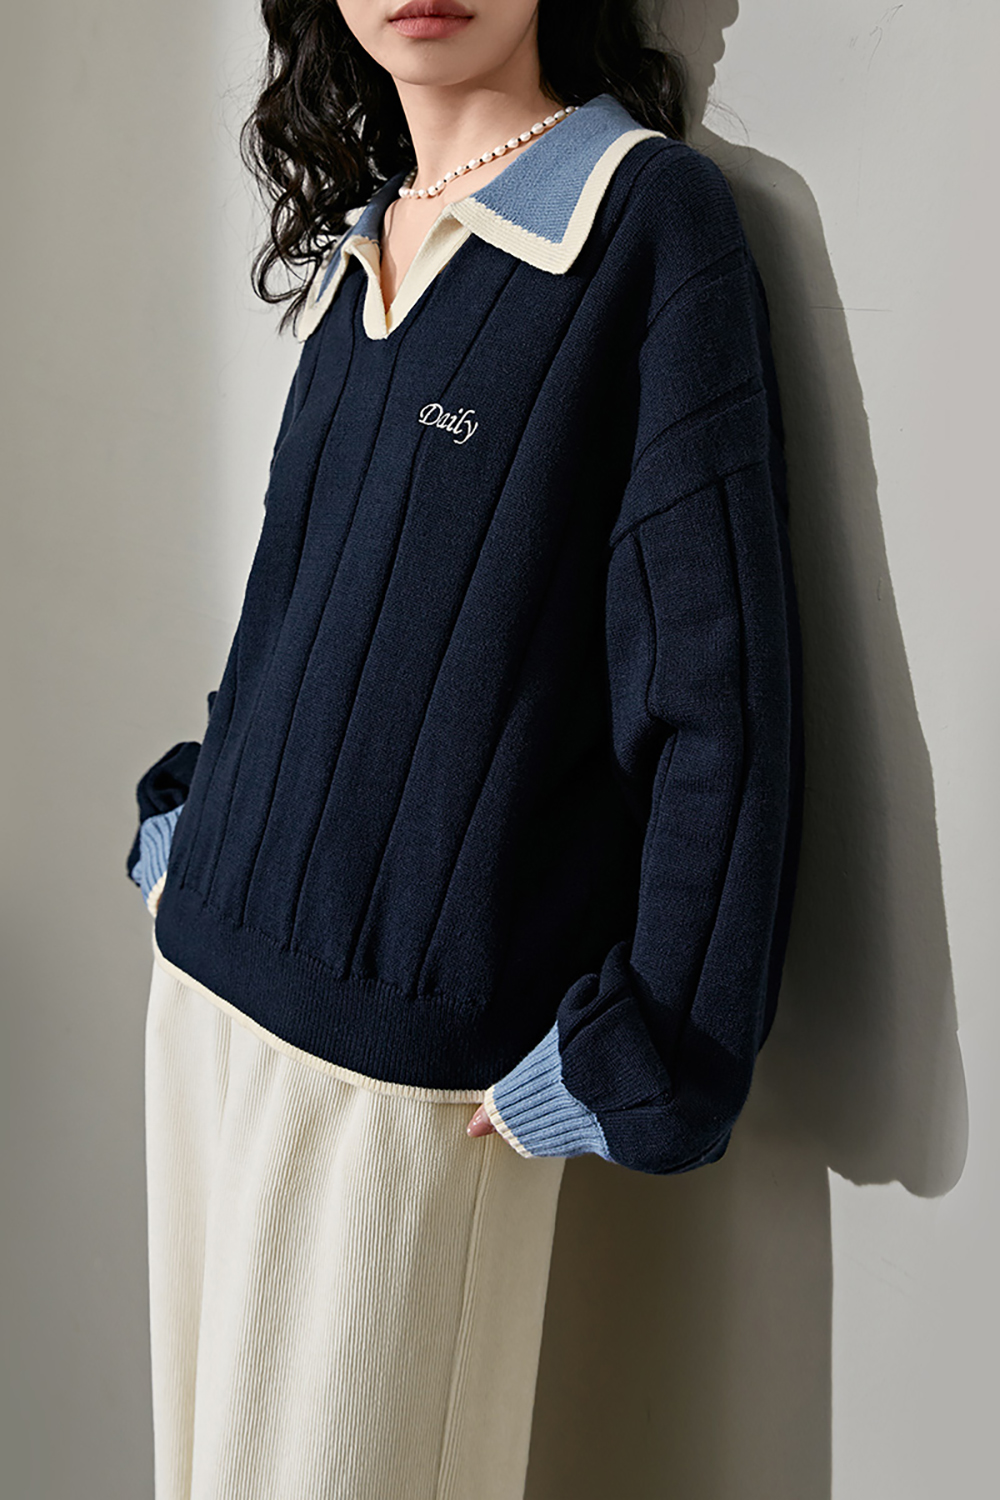 Navy blue vertical striped lapel sweater